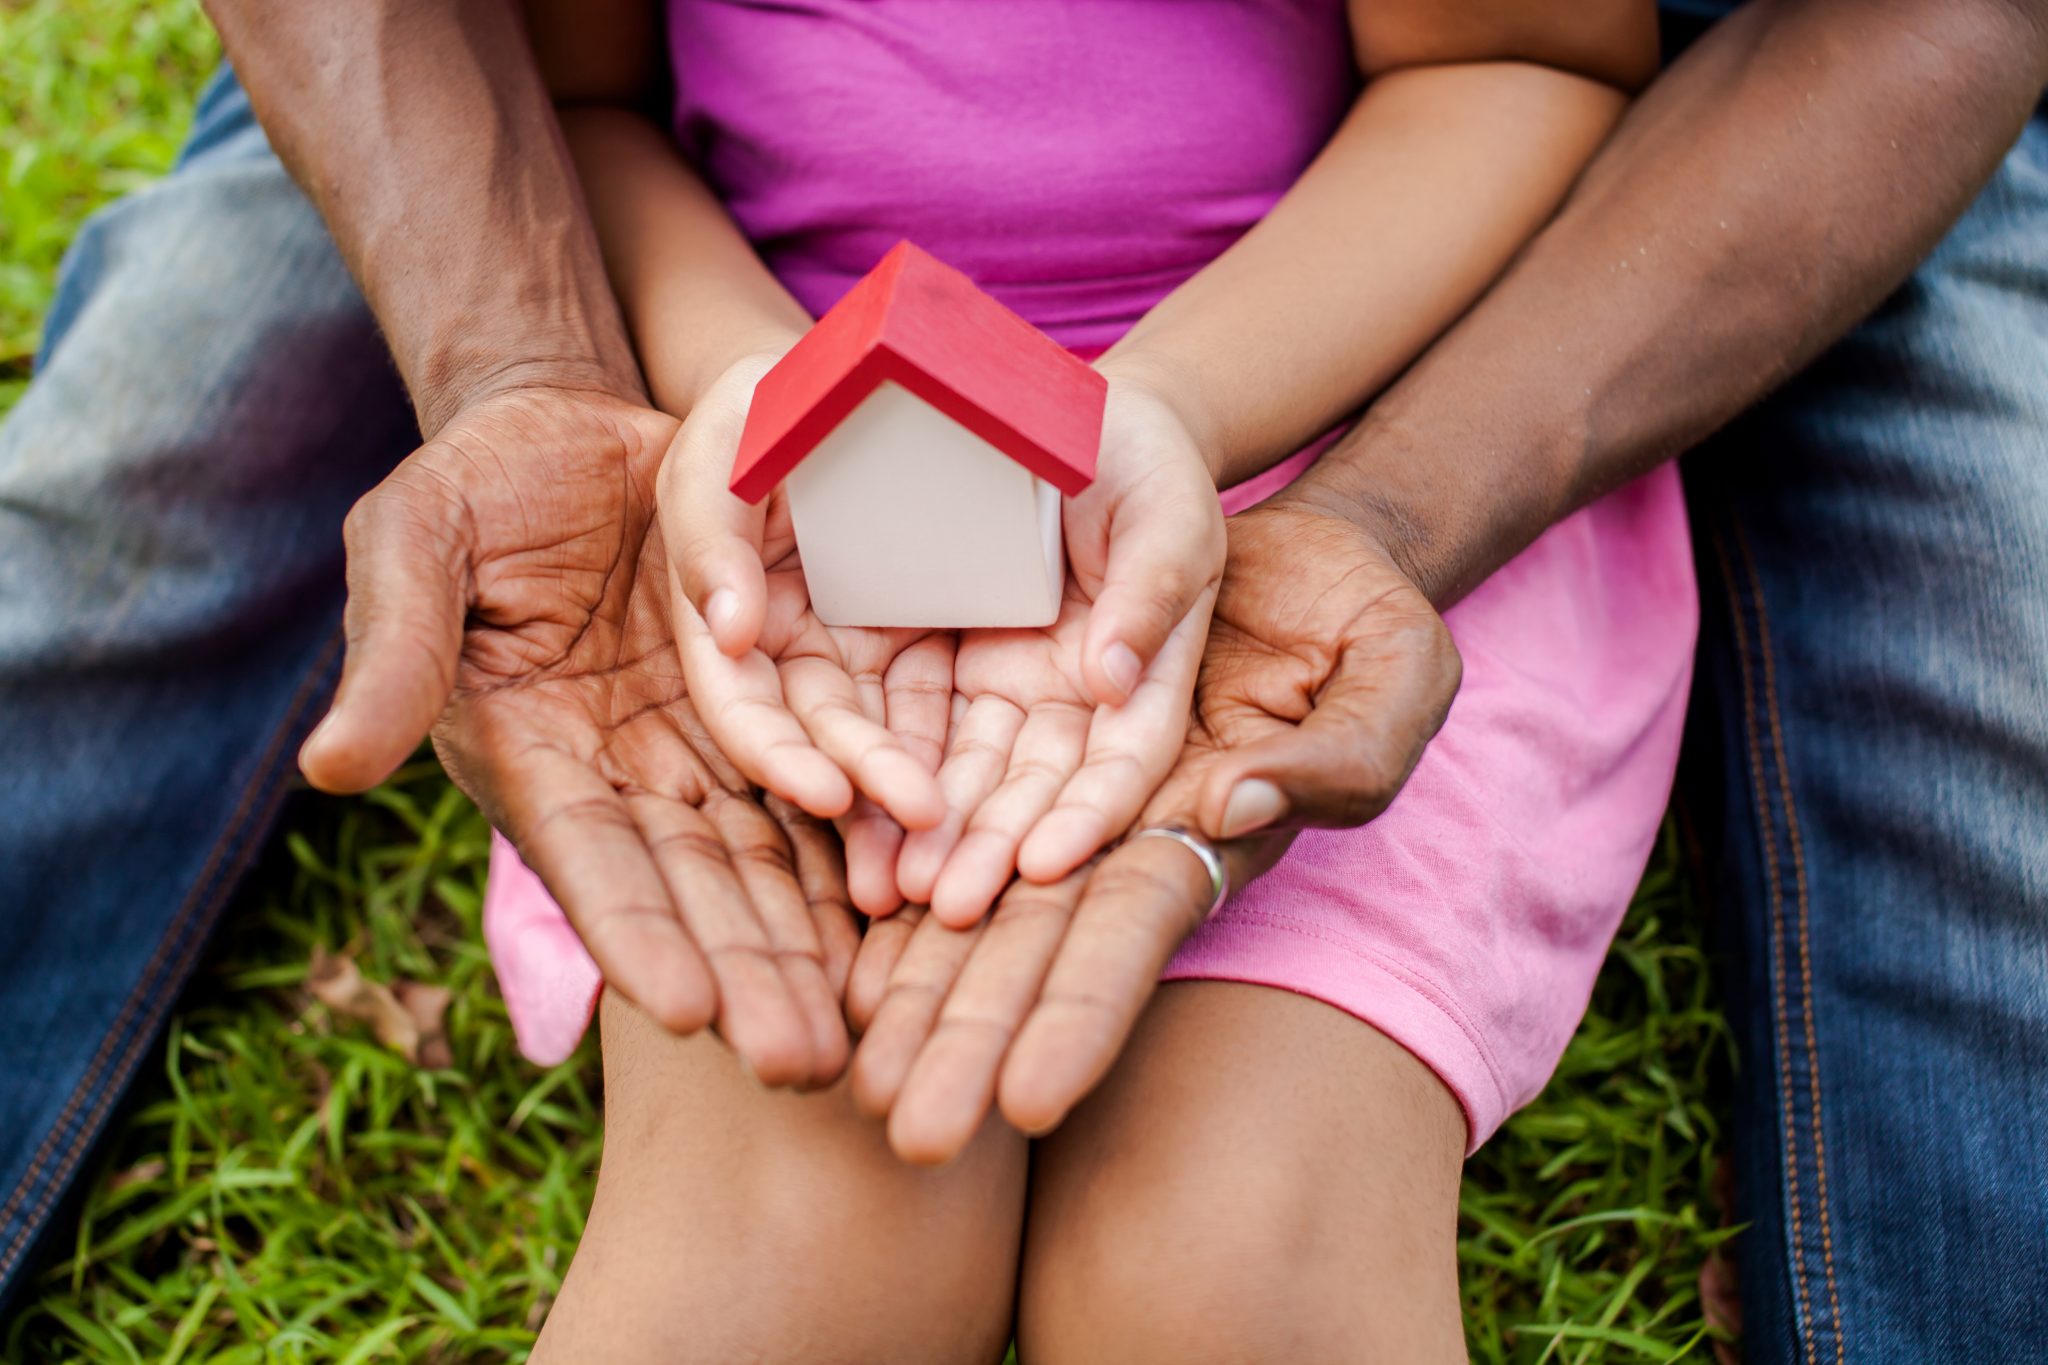 Parent and child hands hold a wooden house toy